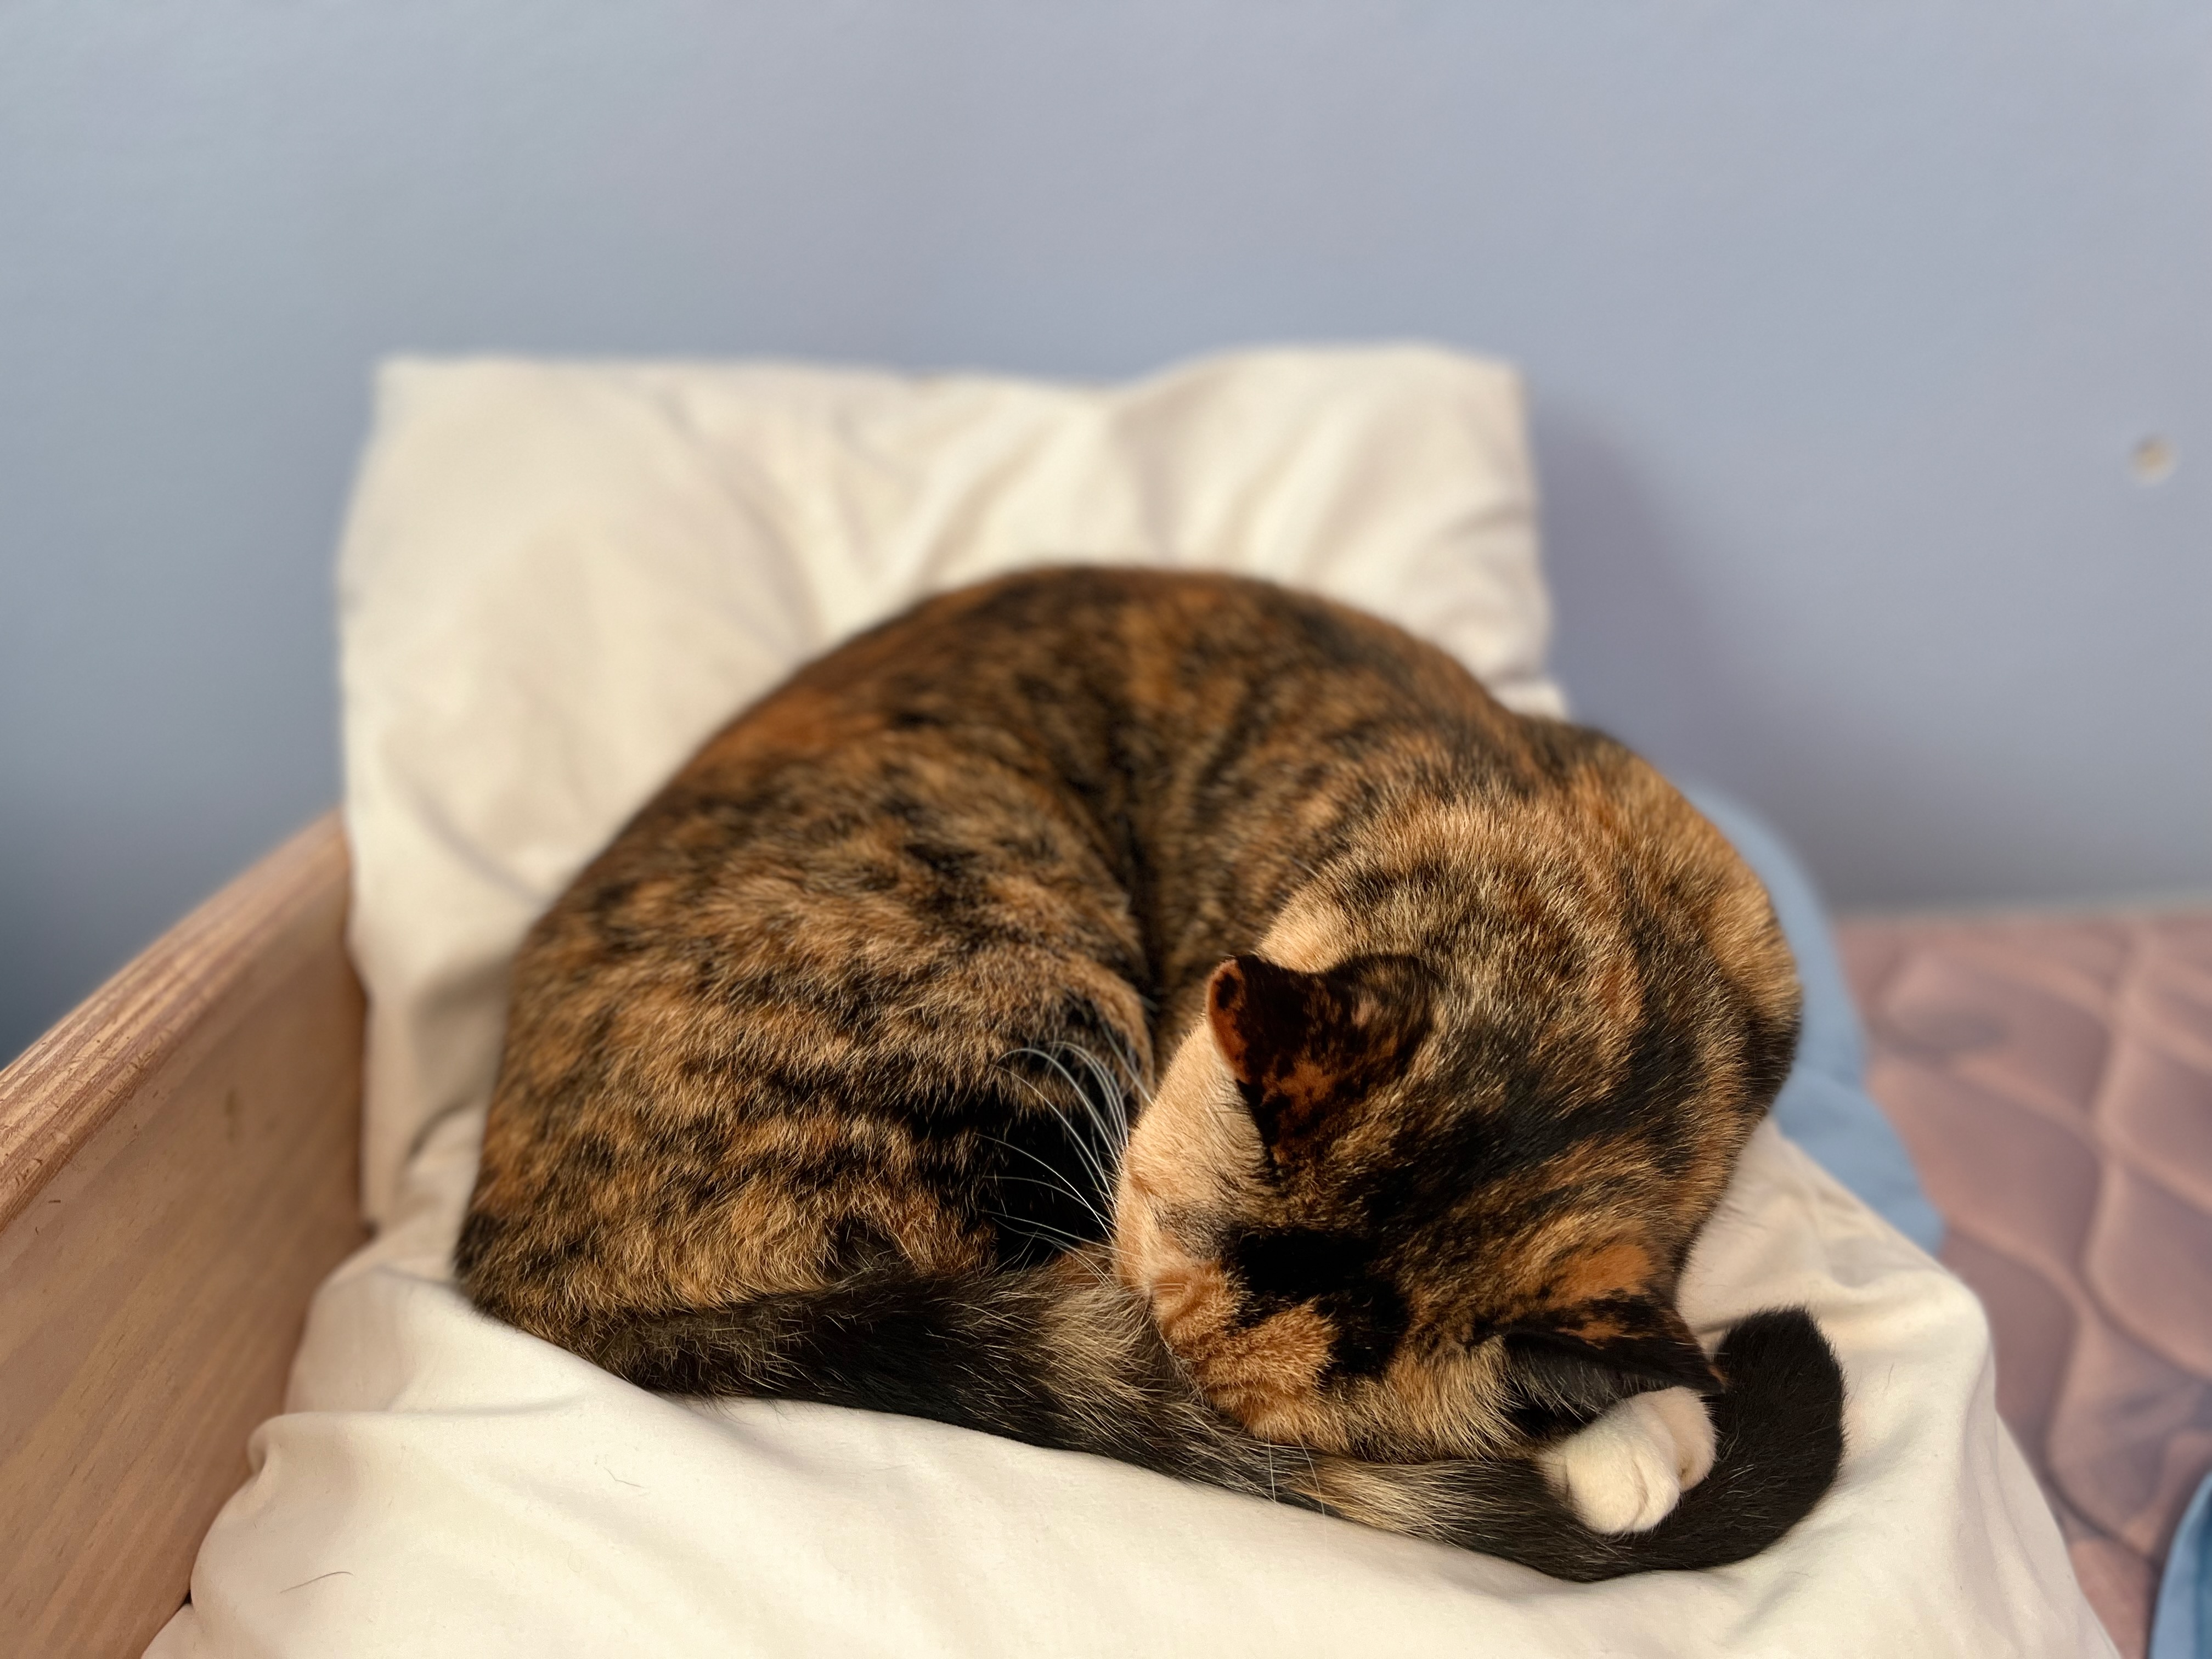 Picture of my cat sleeping curled up on top of some pillows.